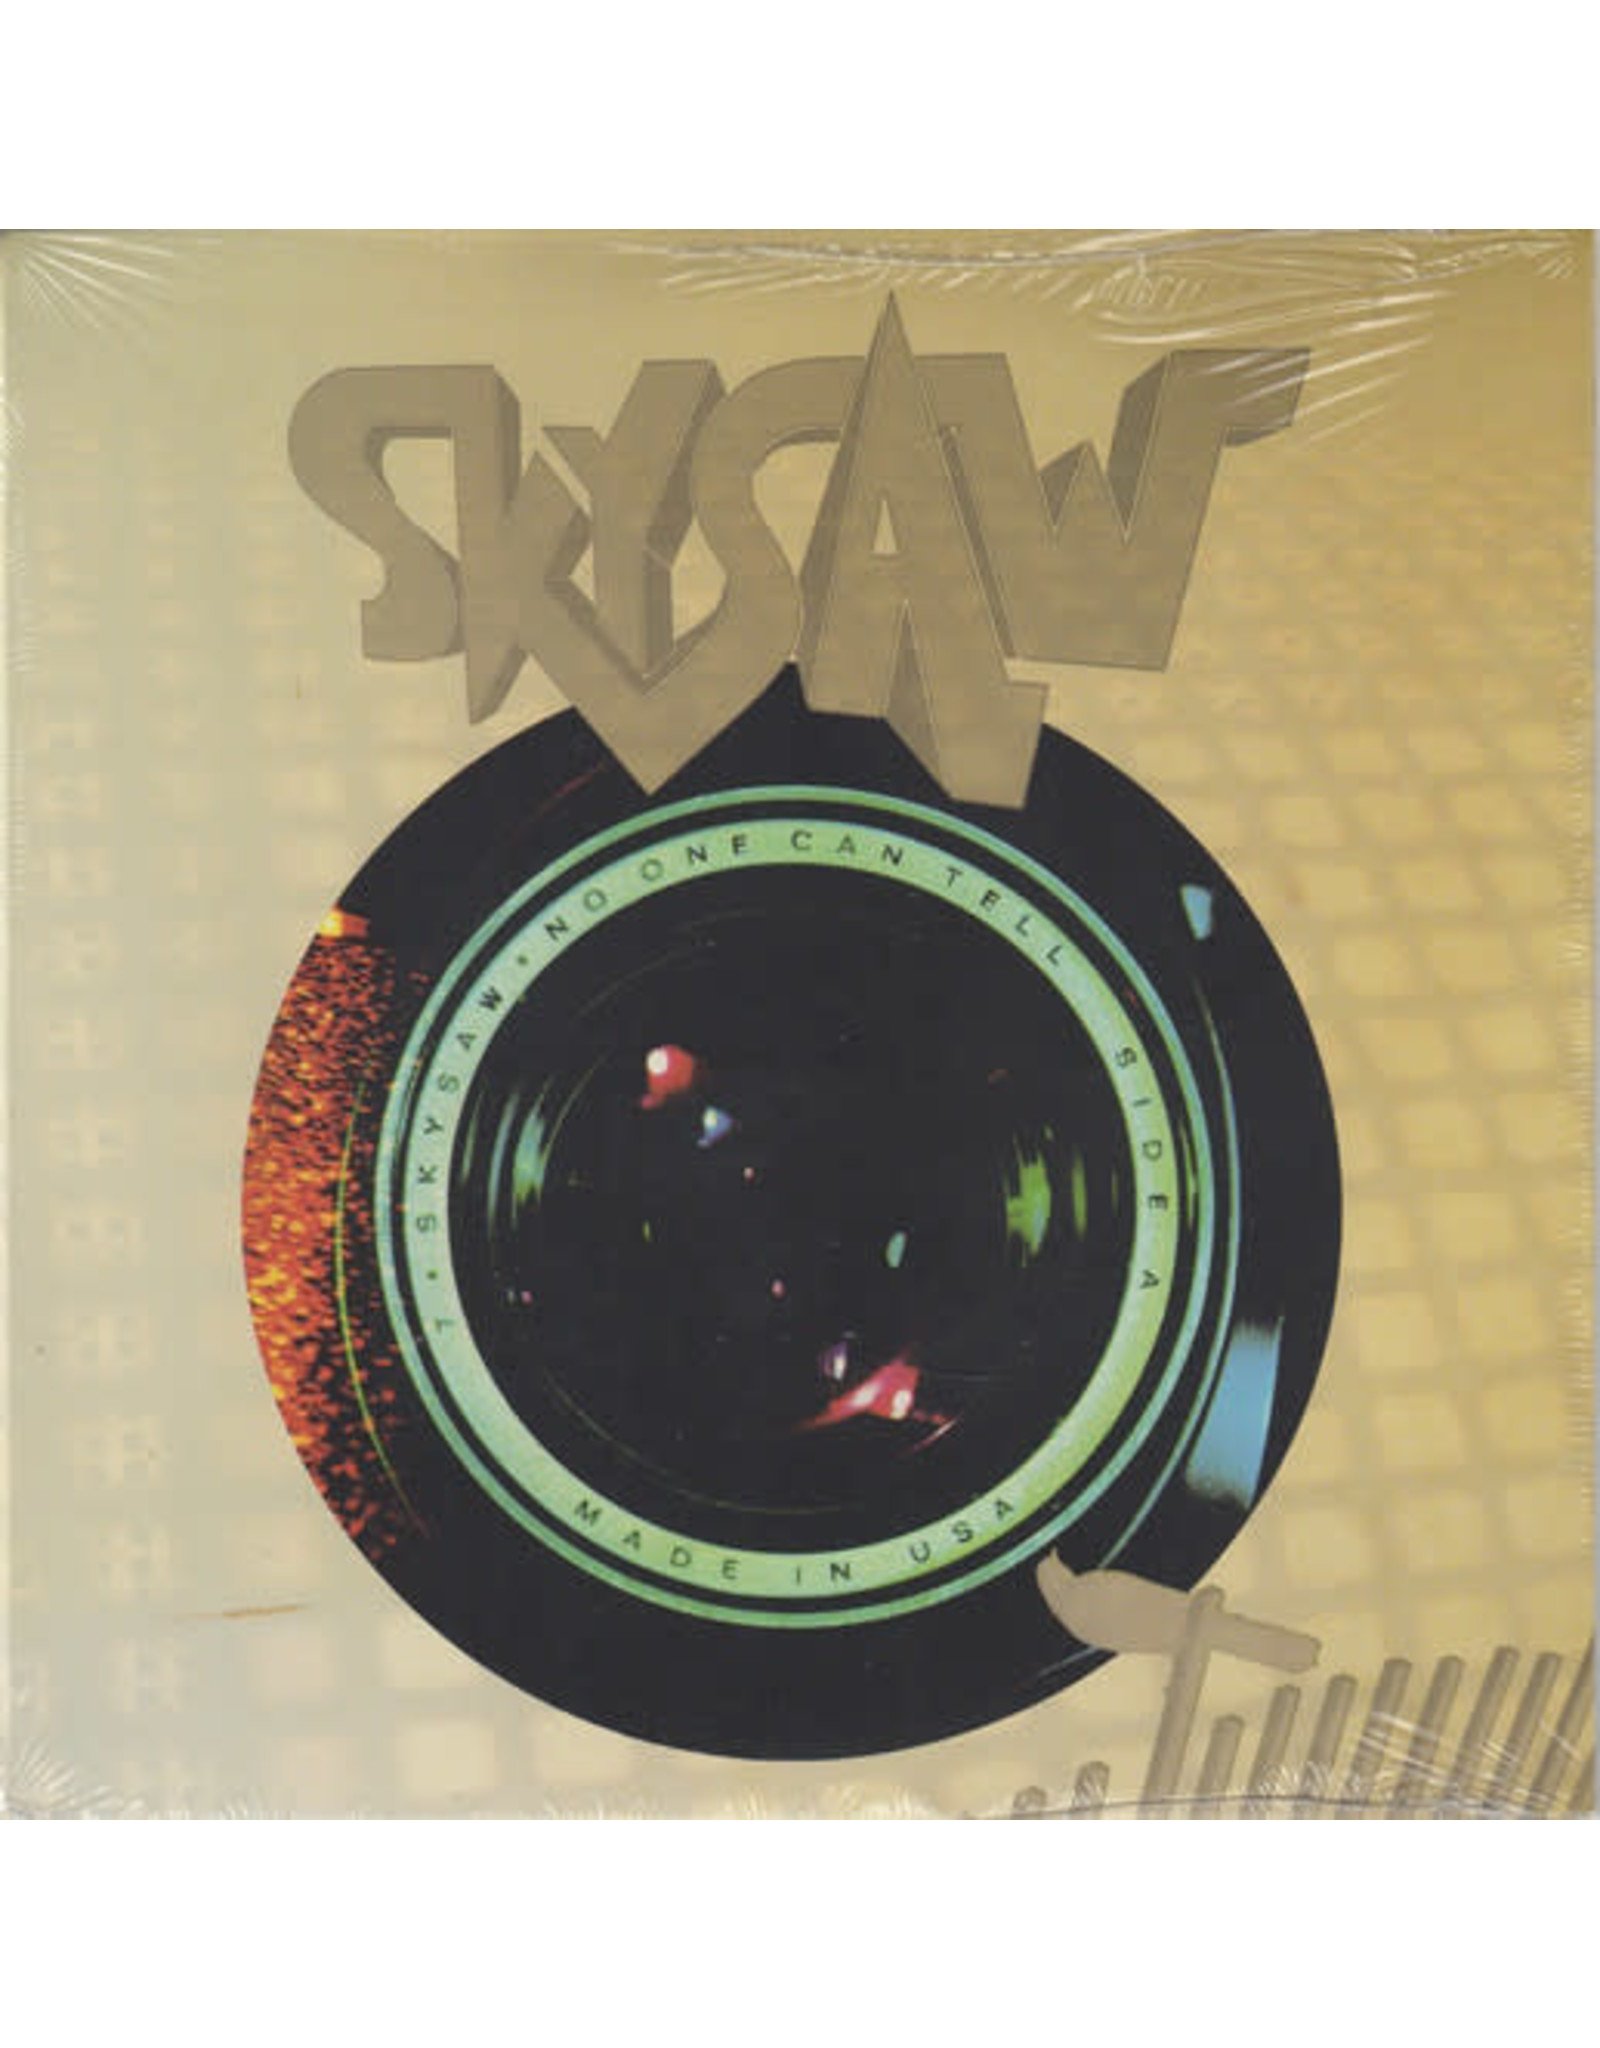 Skysaw - No One Can Tell/Made in the USA 7"